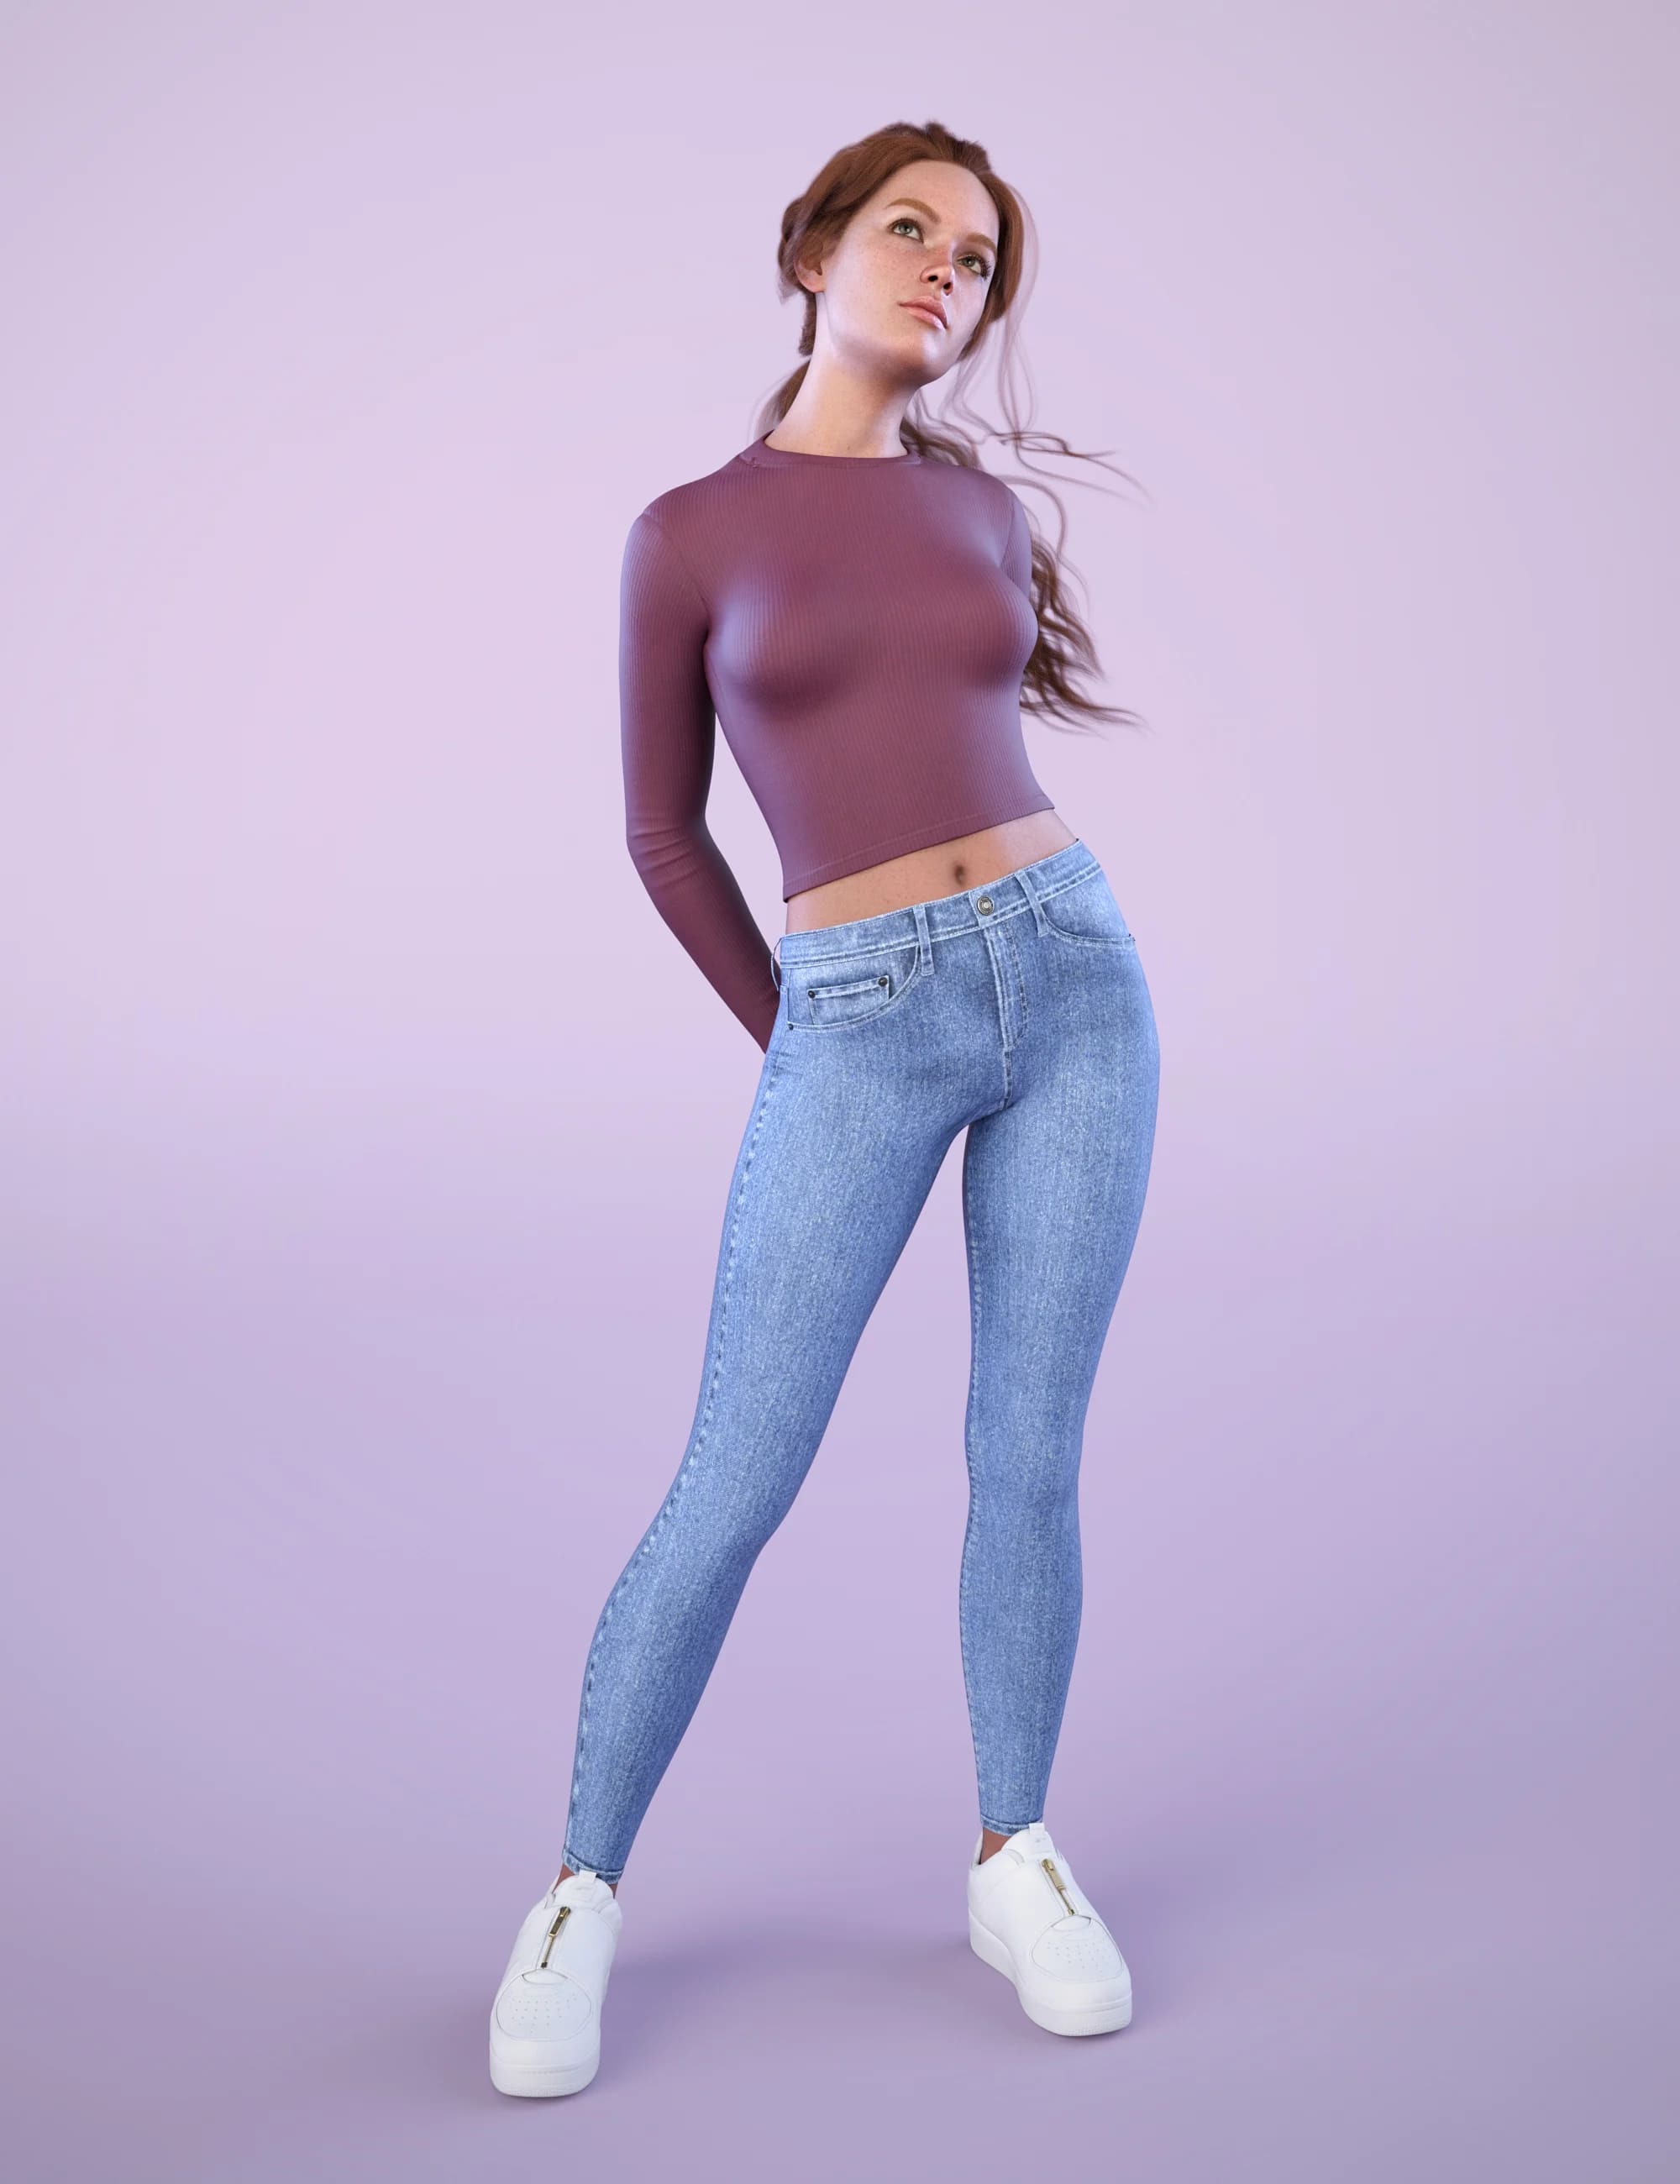 NG High Waist Skinny Jeans Outfit for Genesis 9_DAZ3D下载站